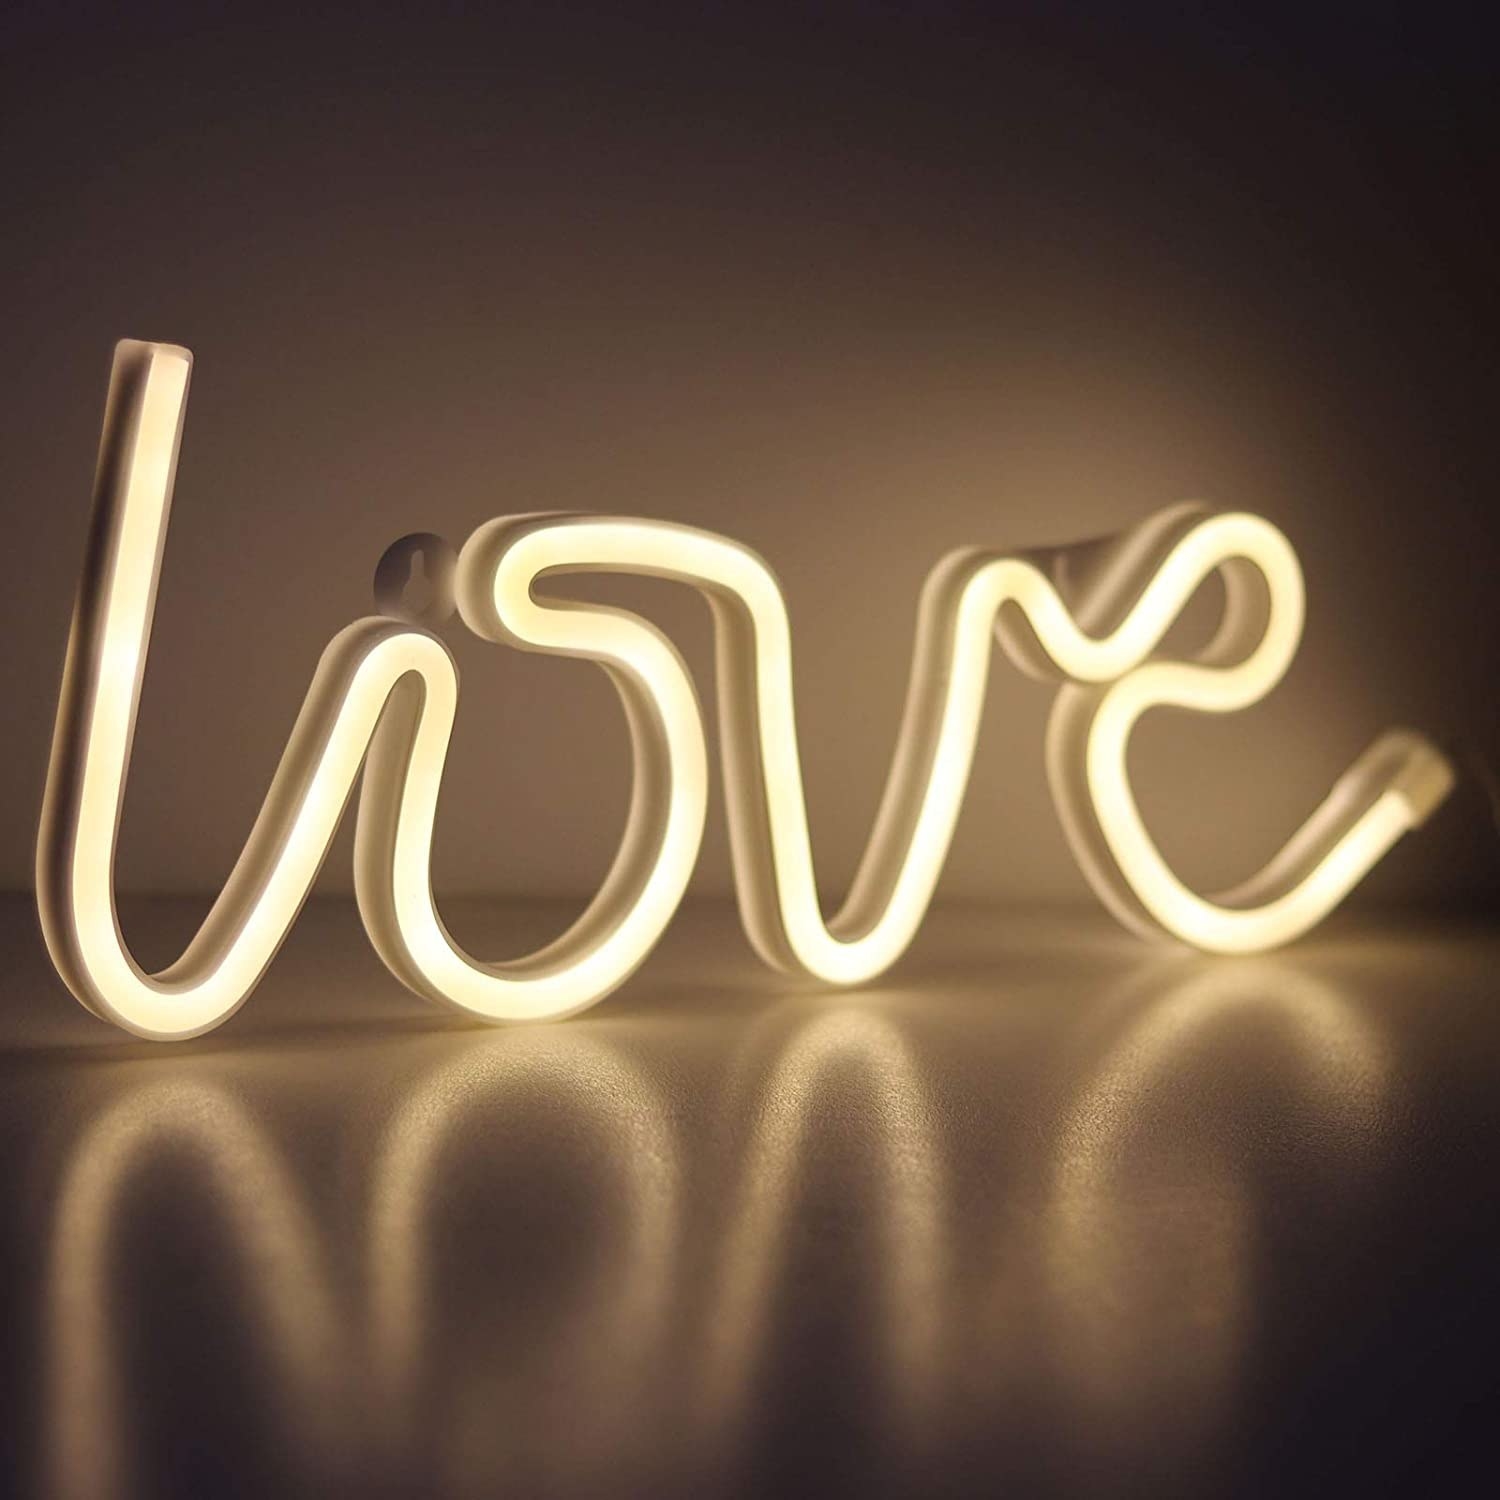 an LED light that spells out love